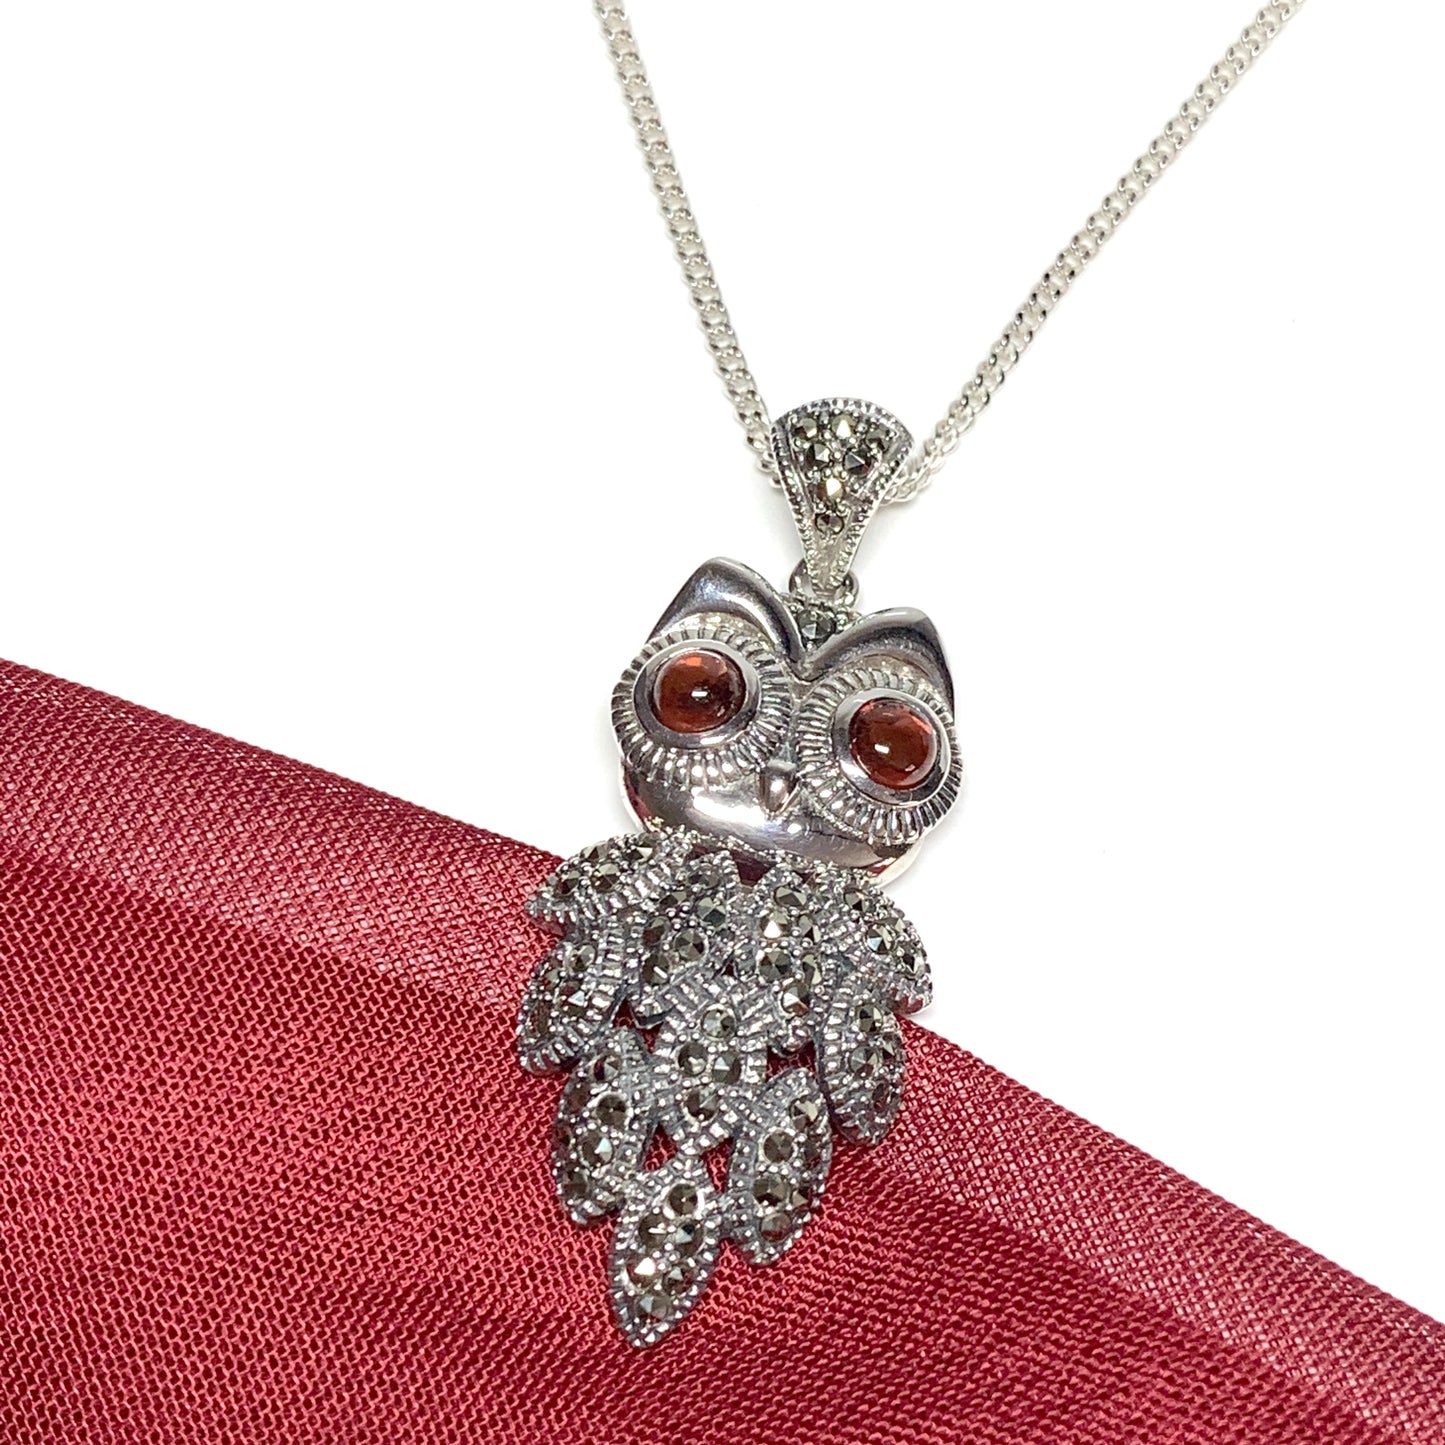 Owl necklace pendant garnet and marcasite sterling silver